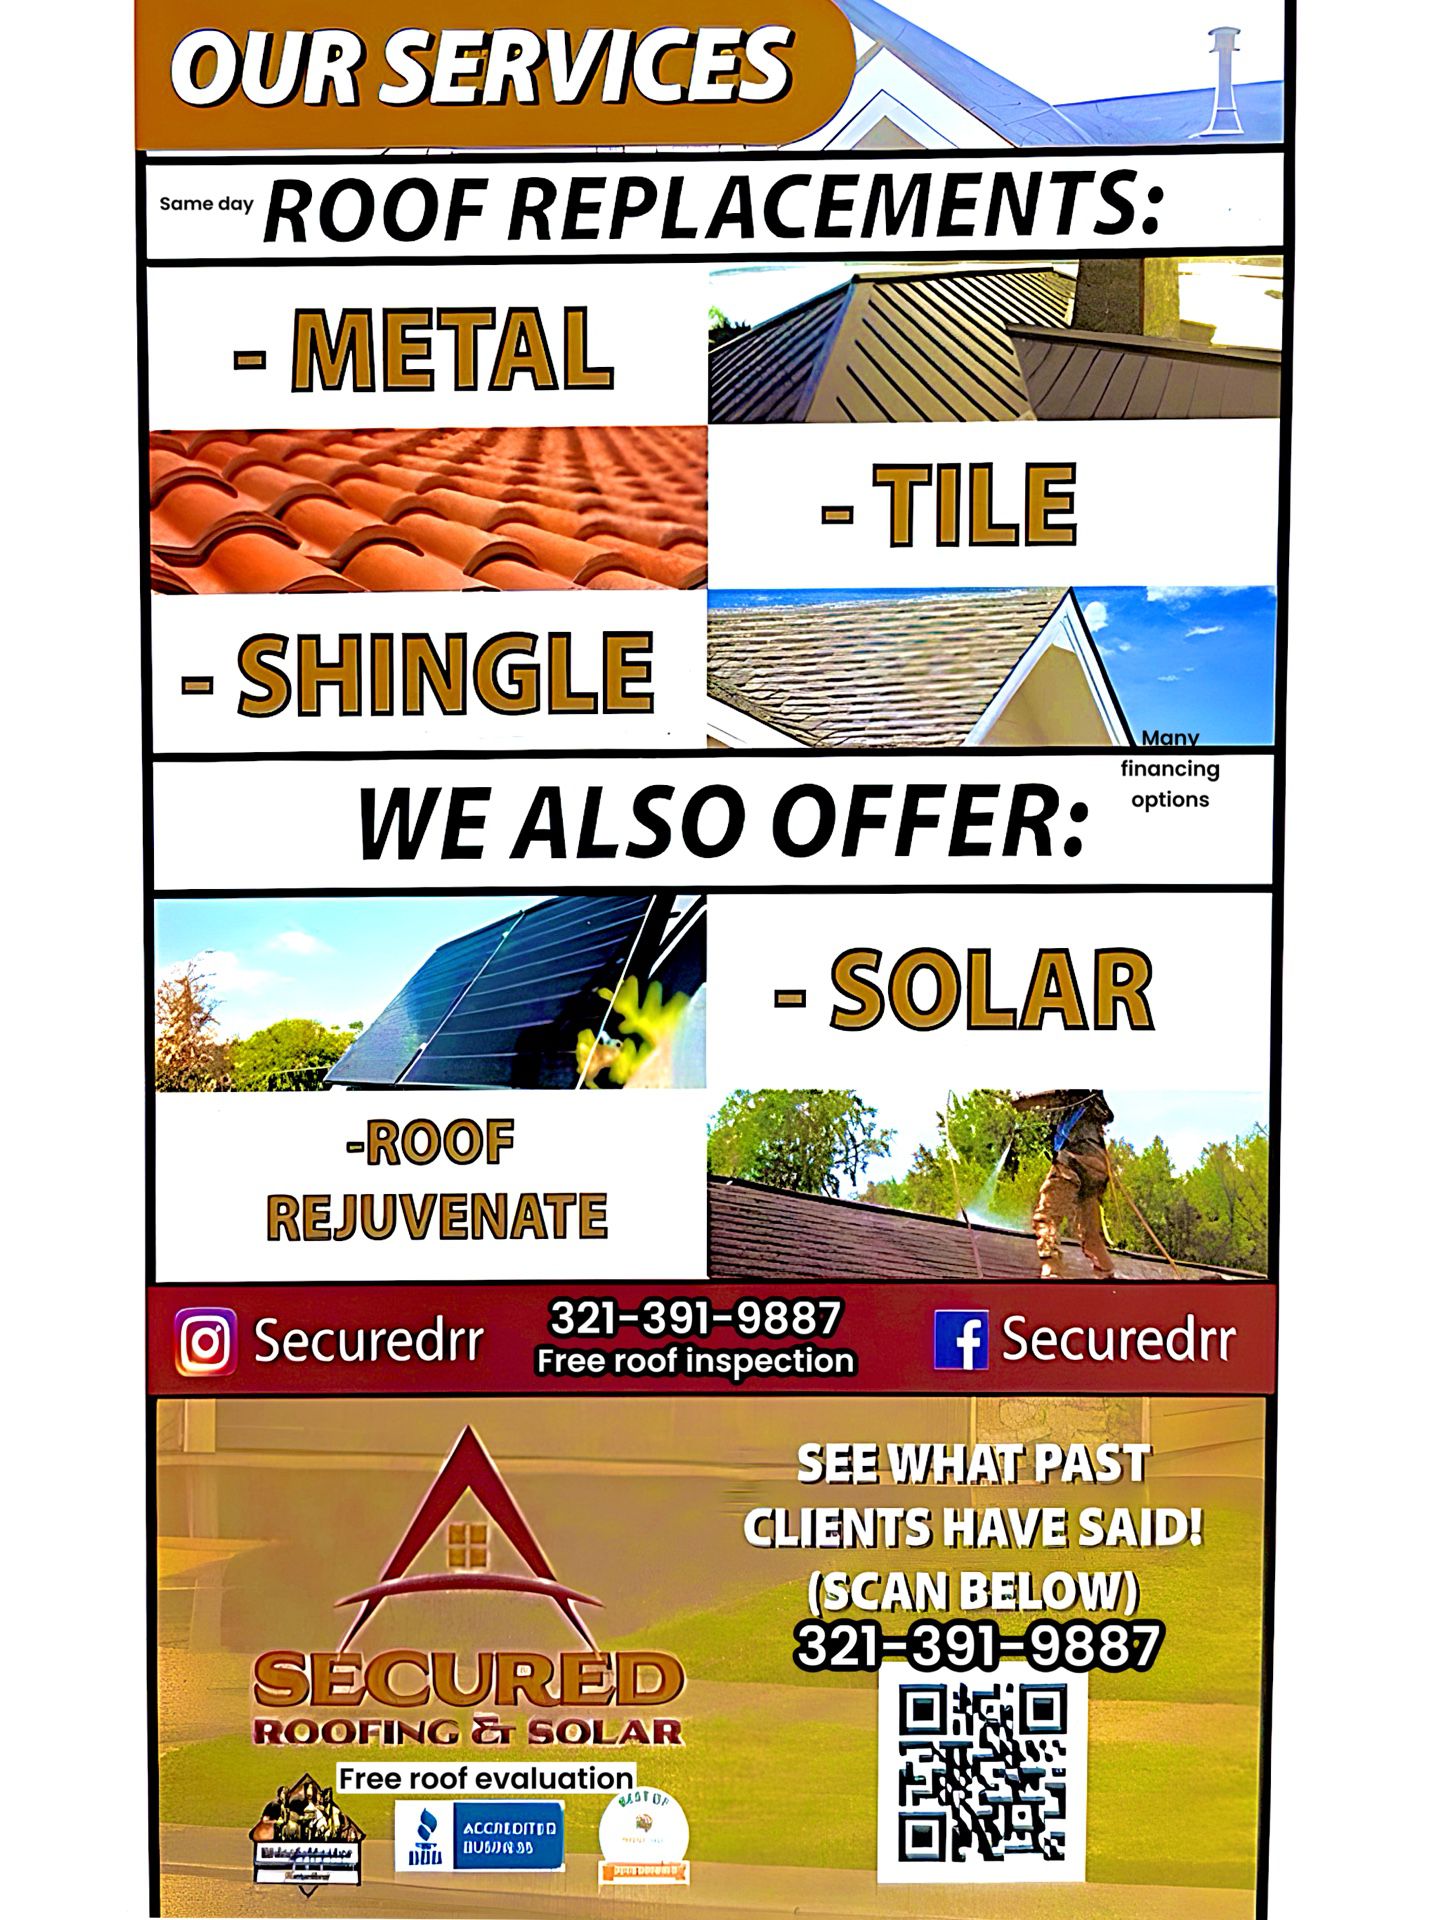 Florida Roofing Material